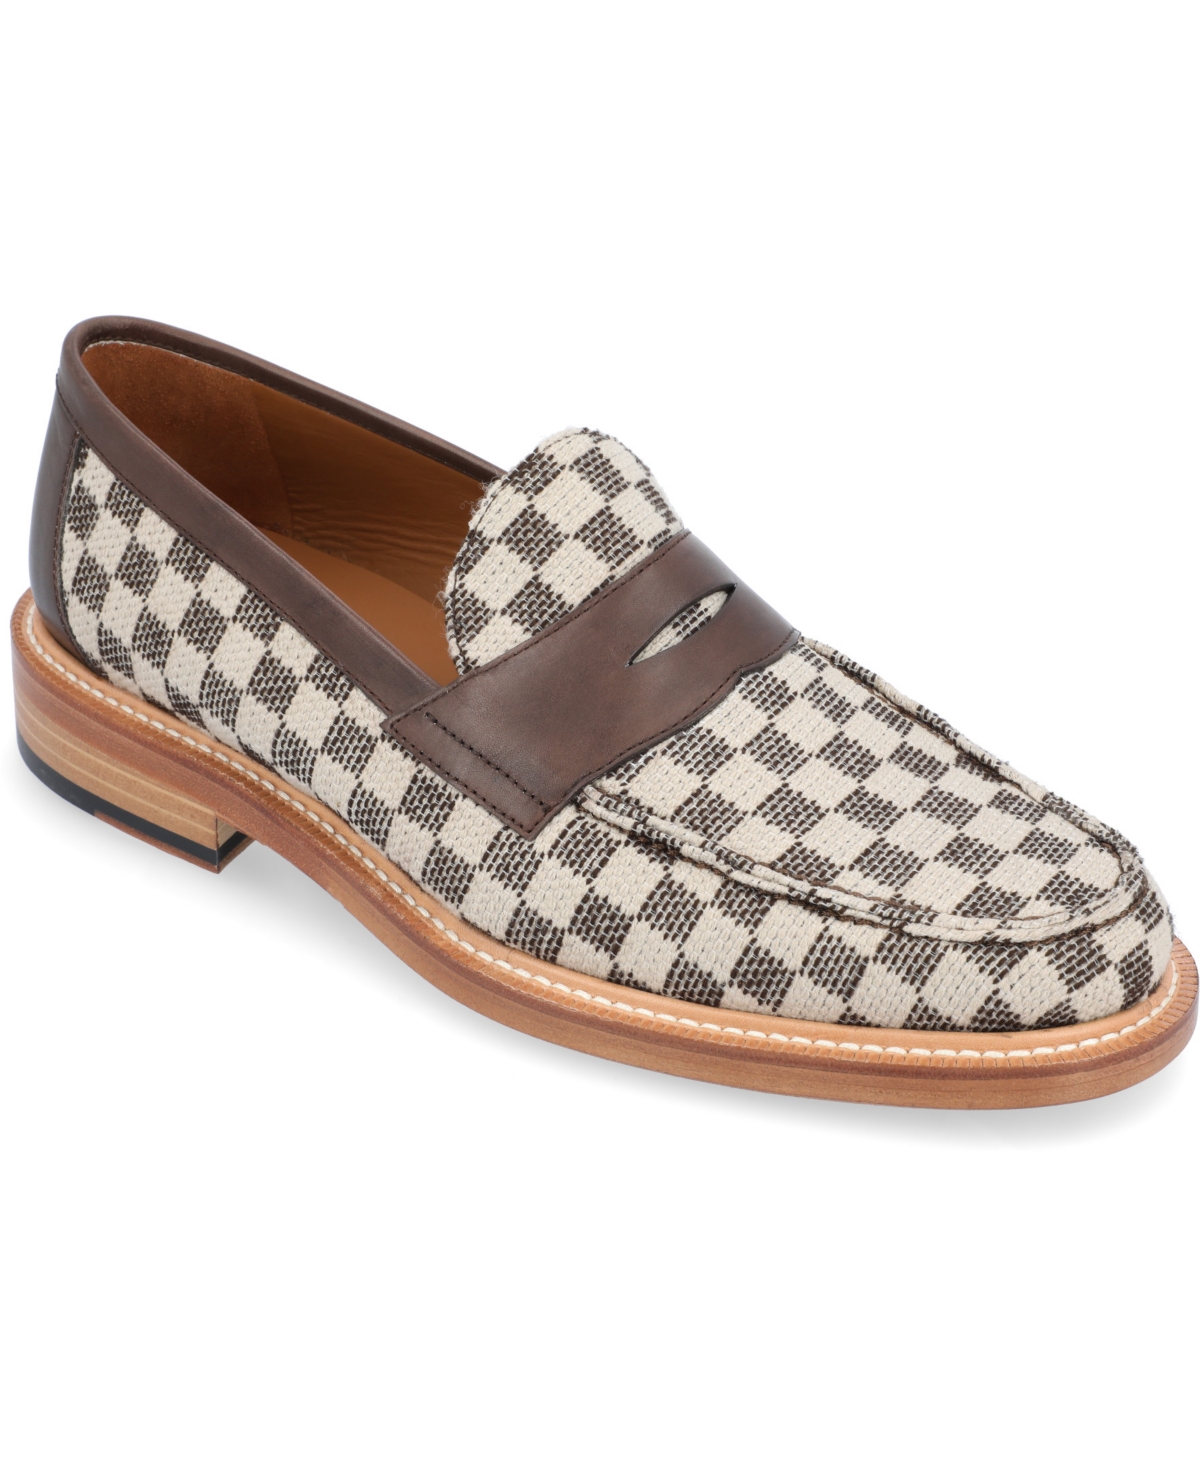 Men's The Fitz Slip-on Penny Loafer - Brown Chec